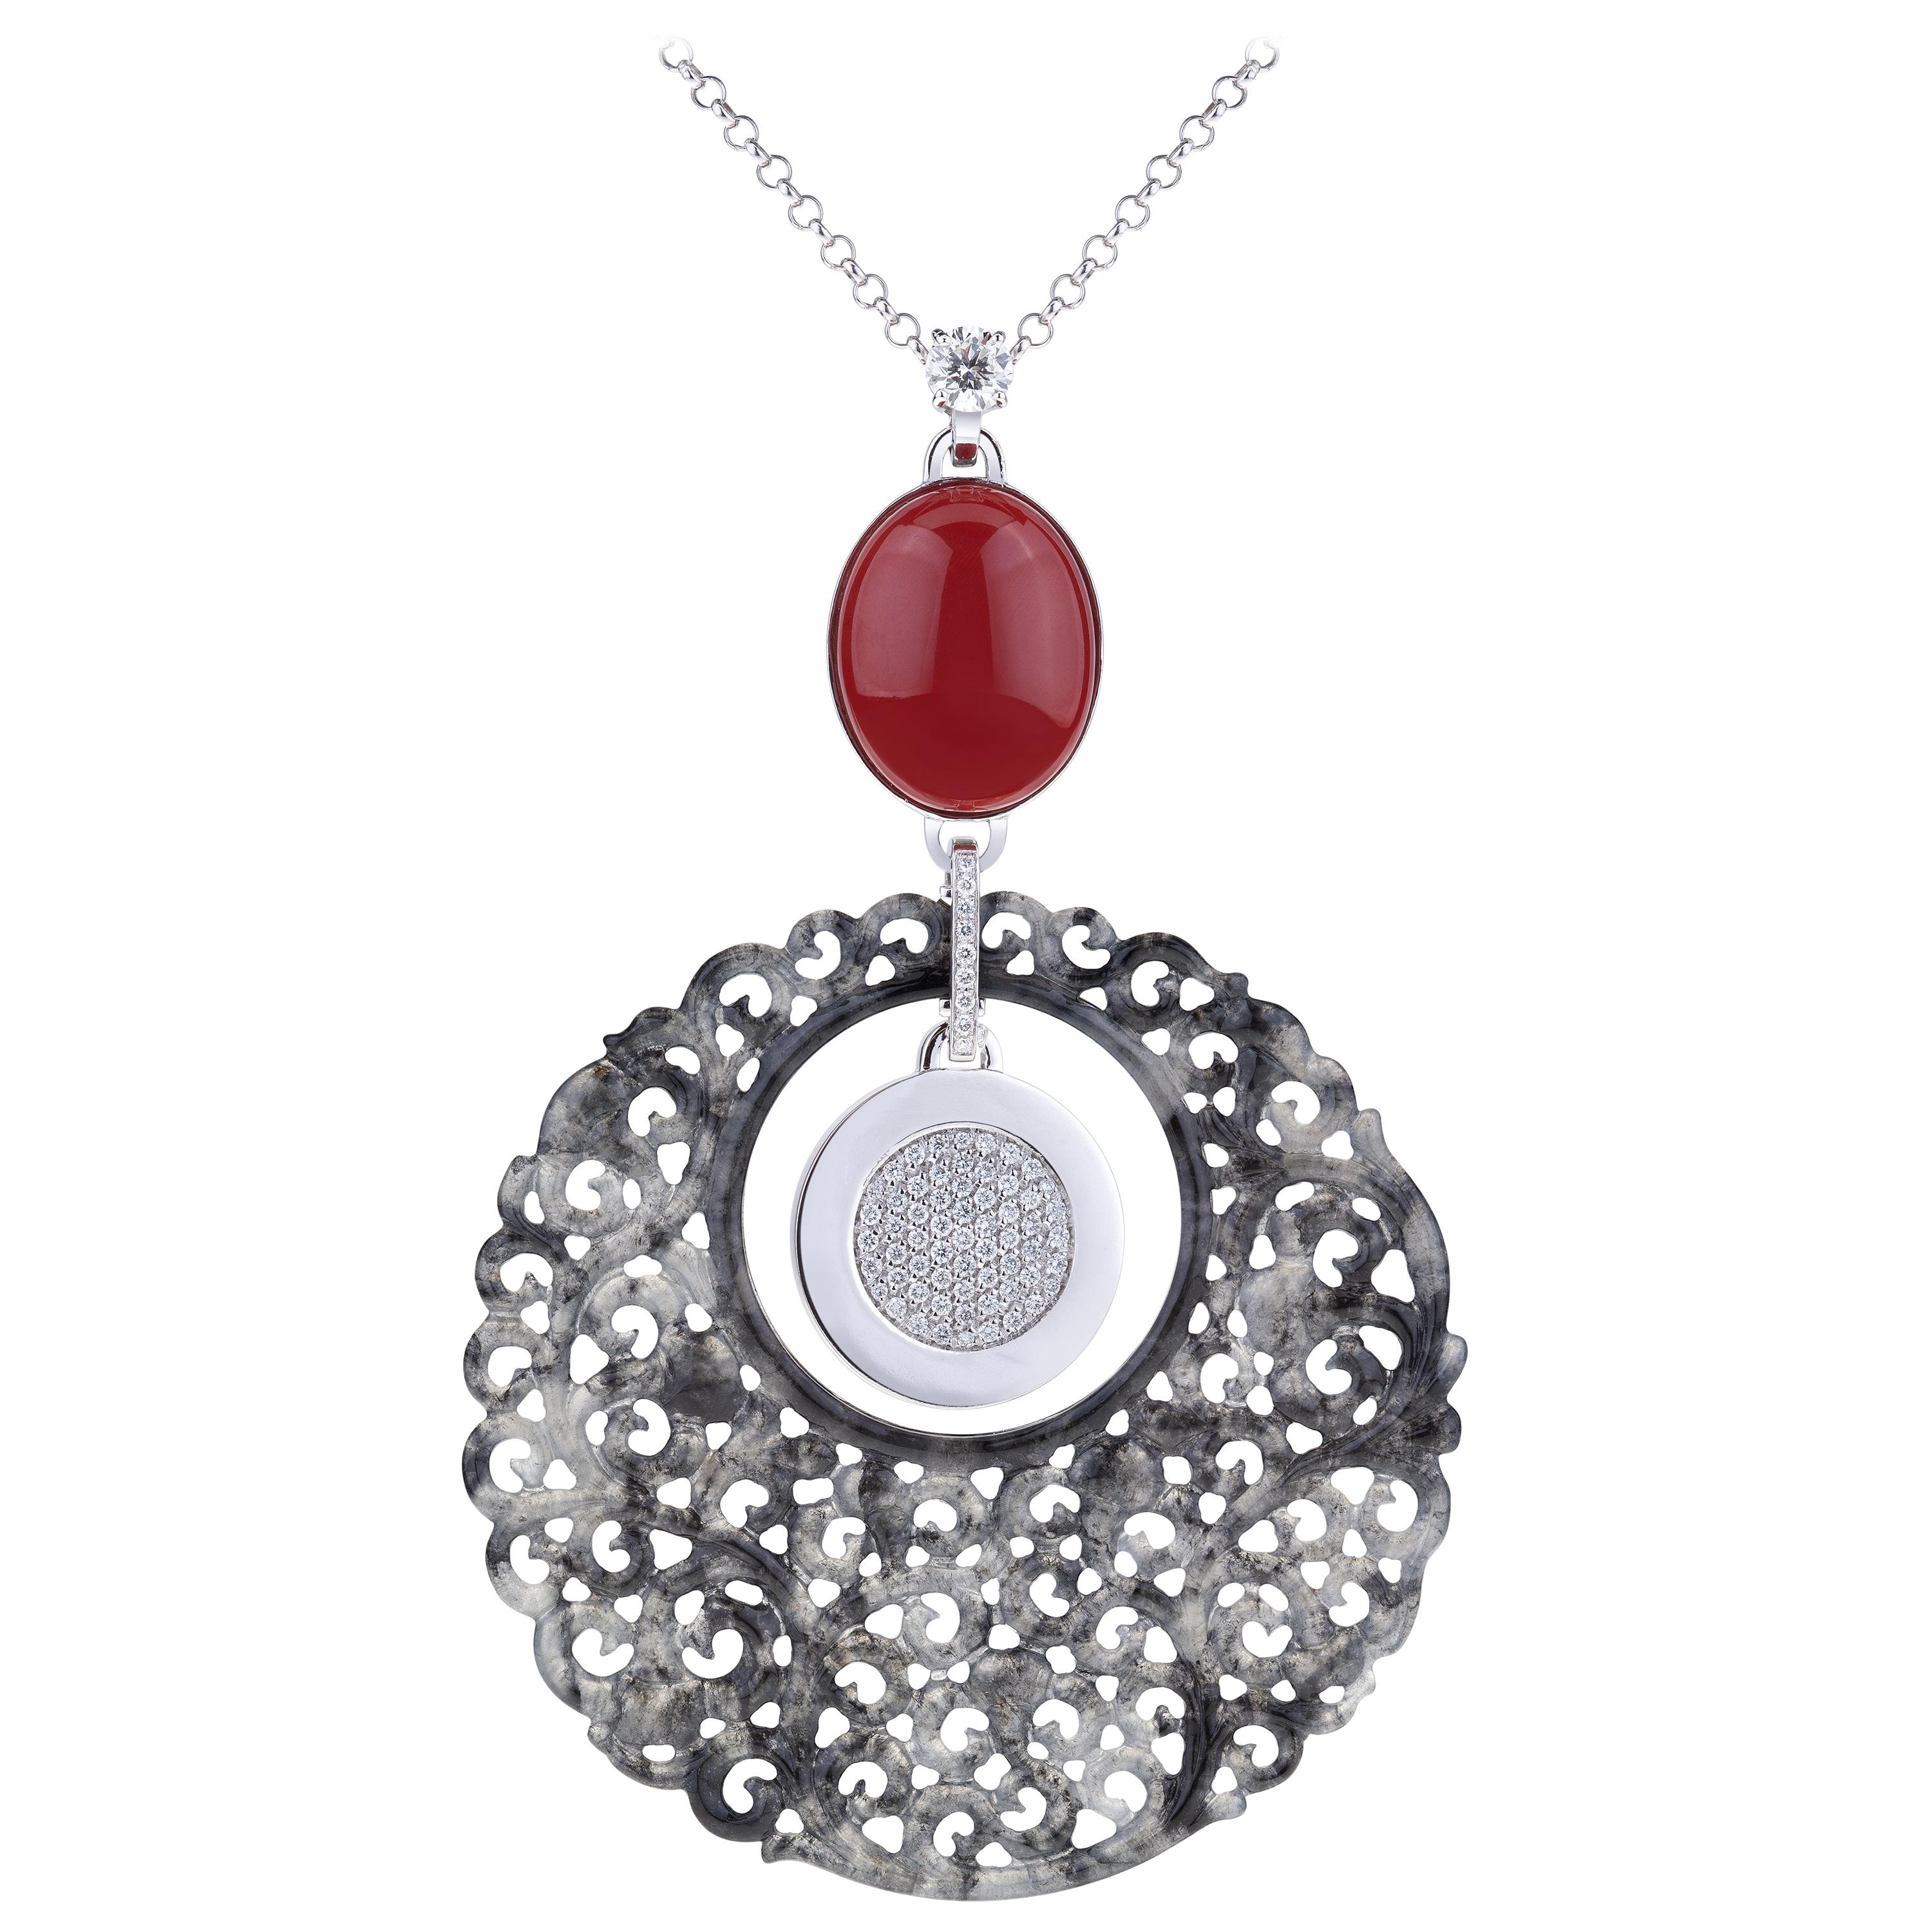 Pendant White Gold Carved Translucent Jade, Solitaire Diamond, Red Coral For Sale